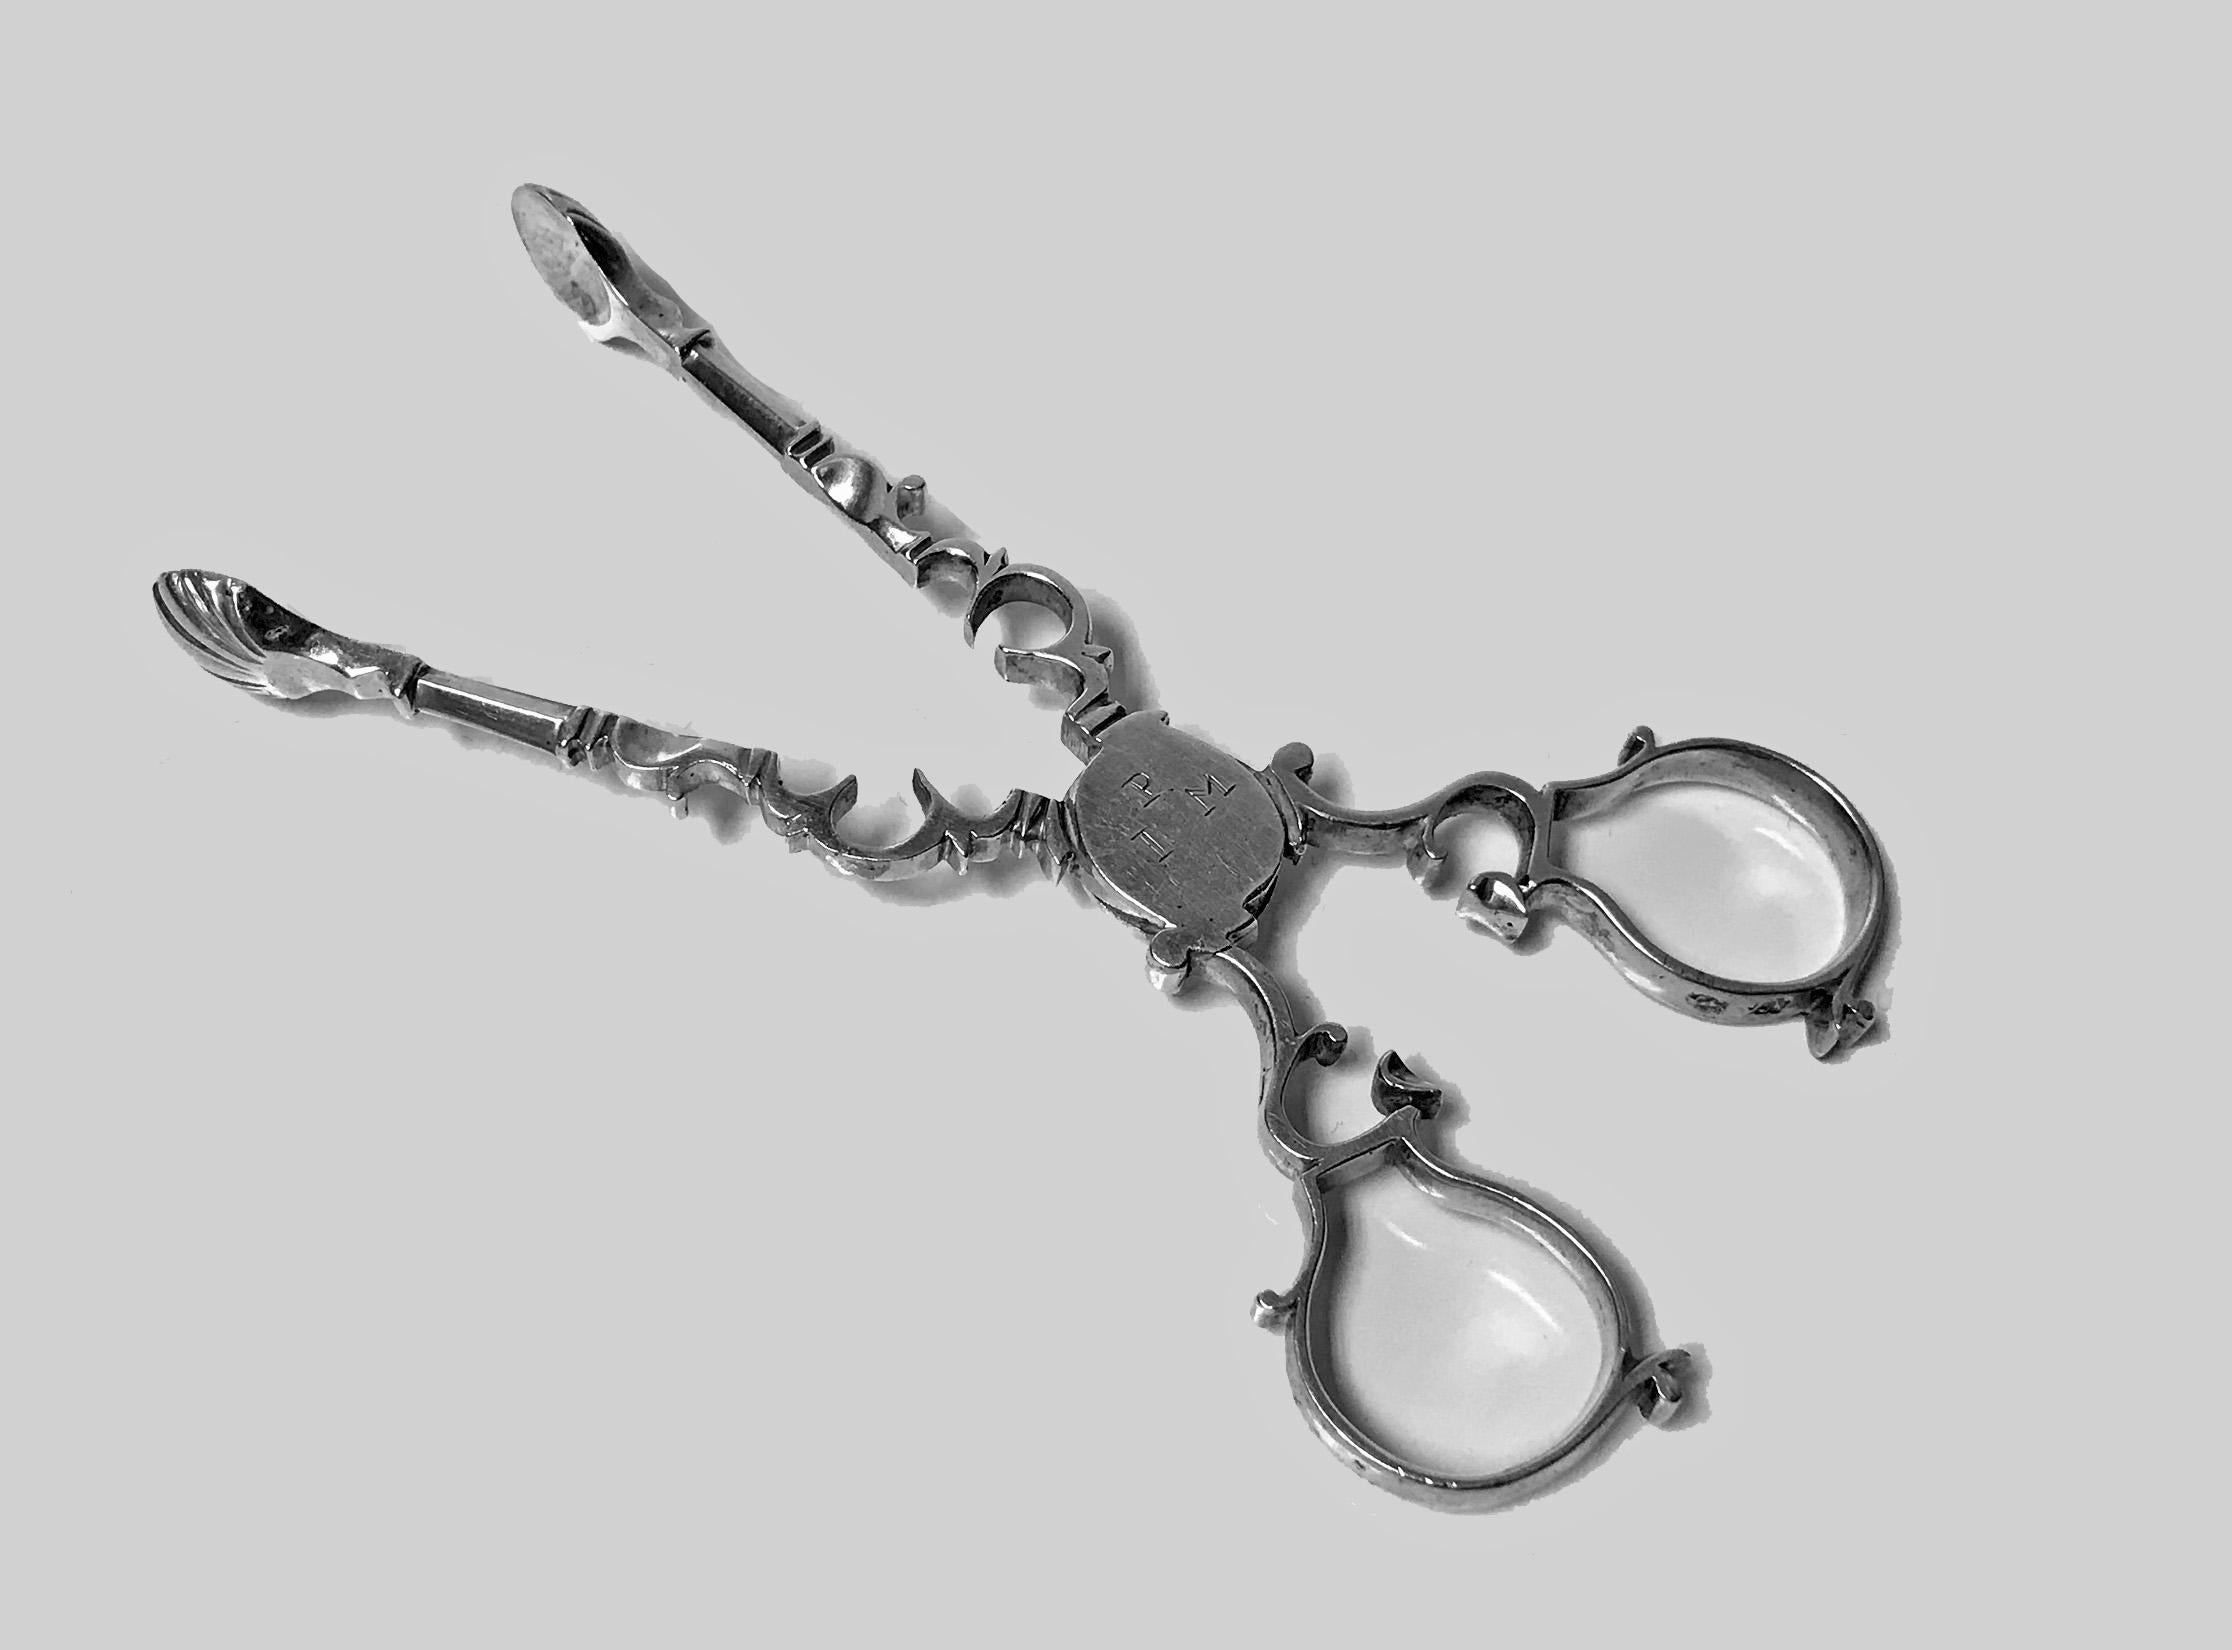 Georgian silver sugar nips, London, circa 1750 probably Thomas Nash 1. Scroll work arms, shell grips, marked with lion passant and maker’s mark in each grip. Measure: Length 5 inches. Item weight: 40.28 grams.